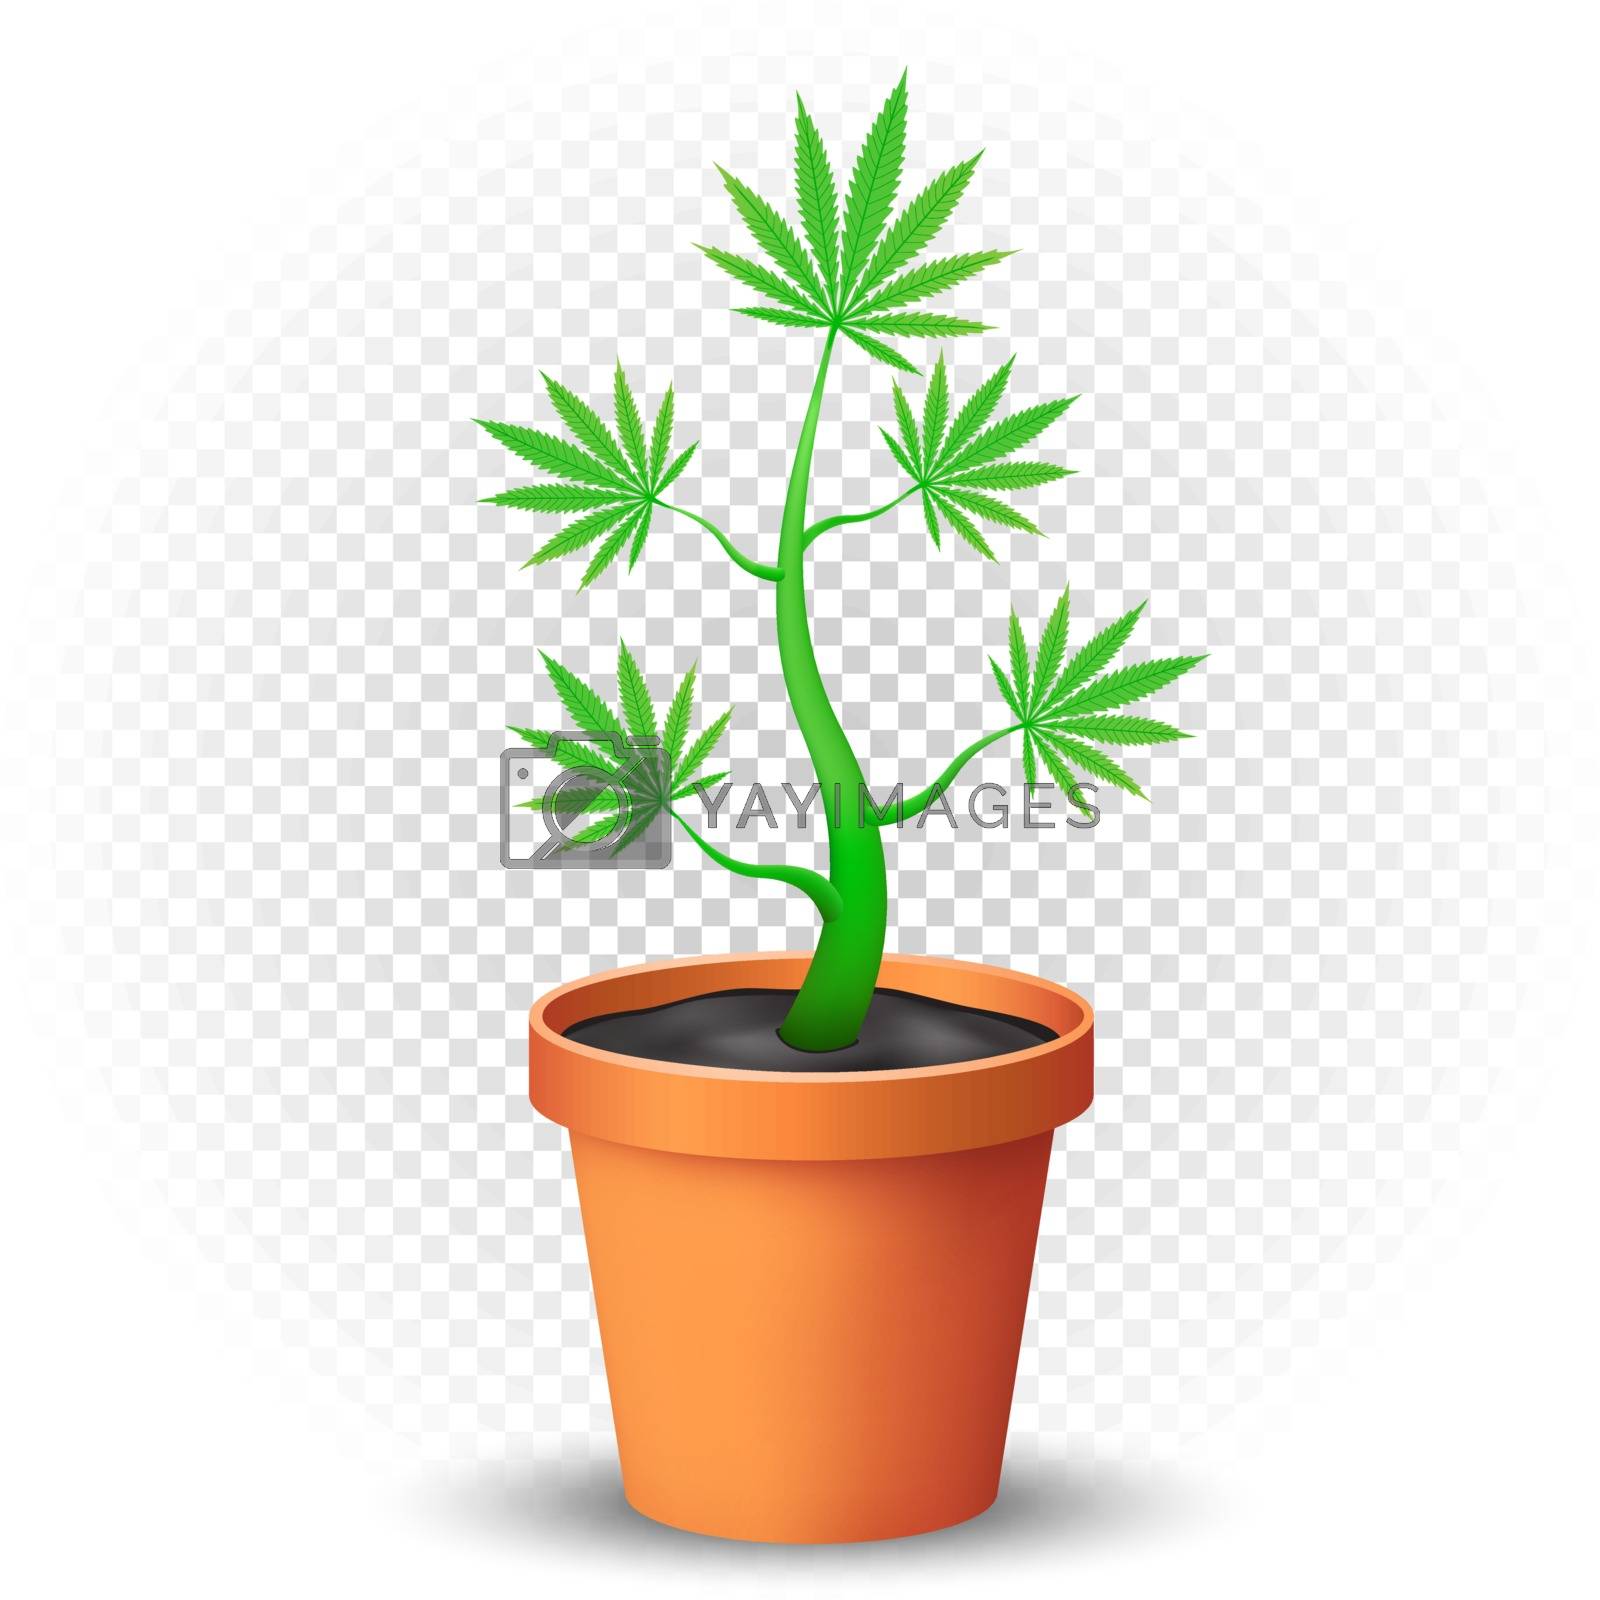 Royalty free image of cannabis plant grows in flowerpot by romvo